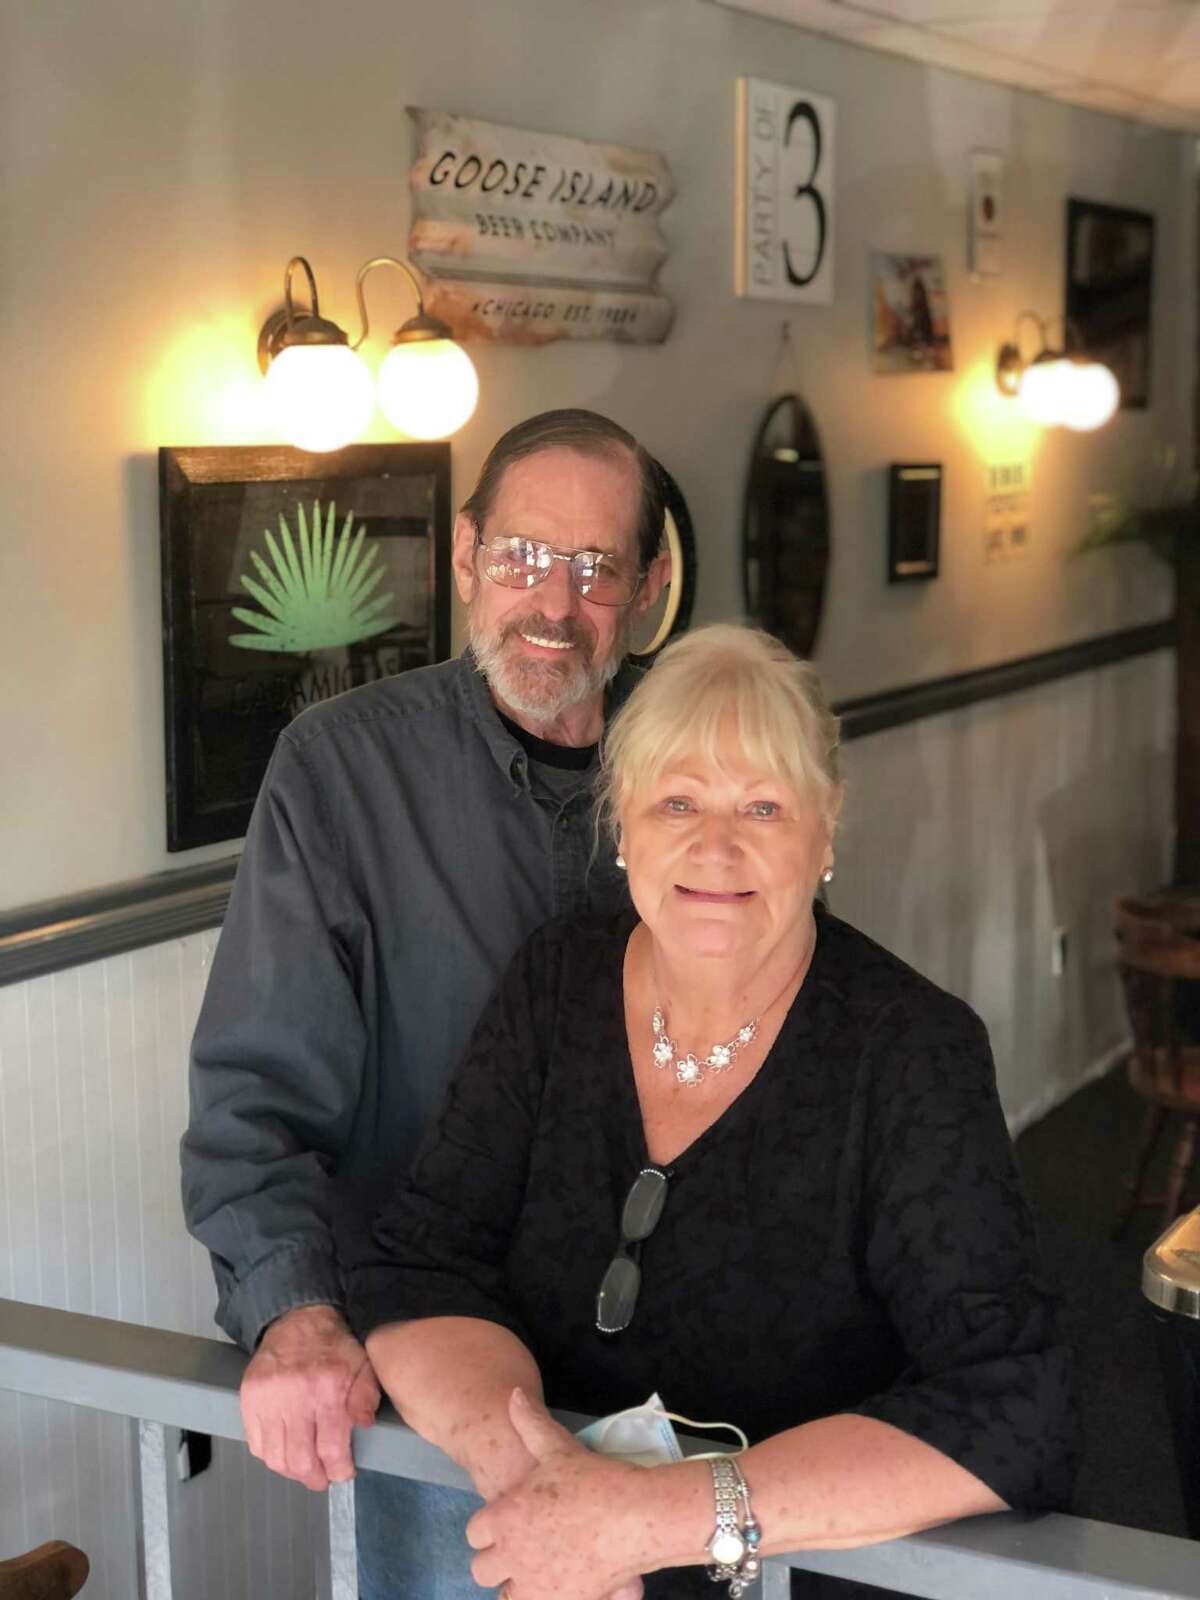 S.J. Barrington's on Route 7 in New Milford recently reopened for business, after having been closed for some time due to the coronavirus pandemic. During its temporary closure, it completed renovations. Above are co-owners James Wright and Susan Daigle.